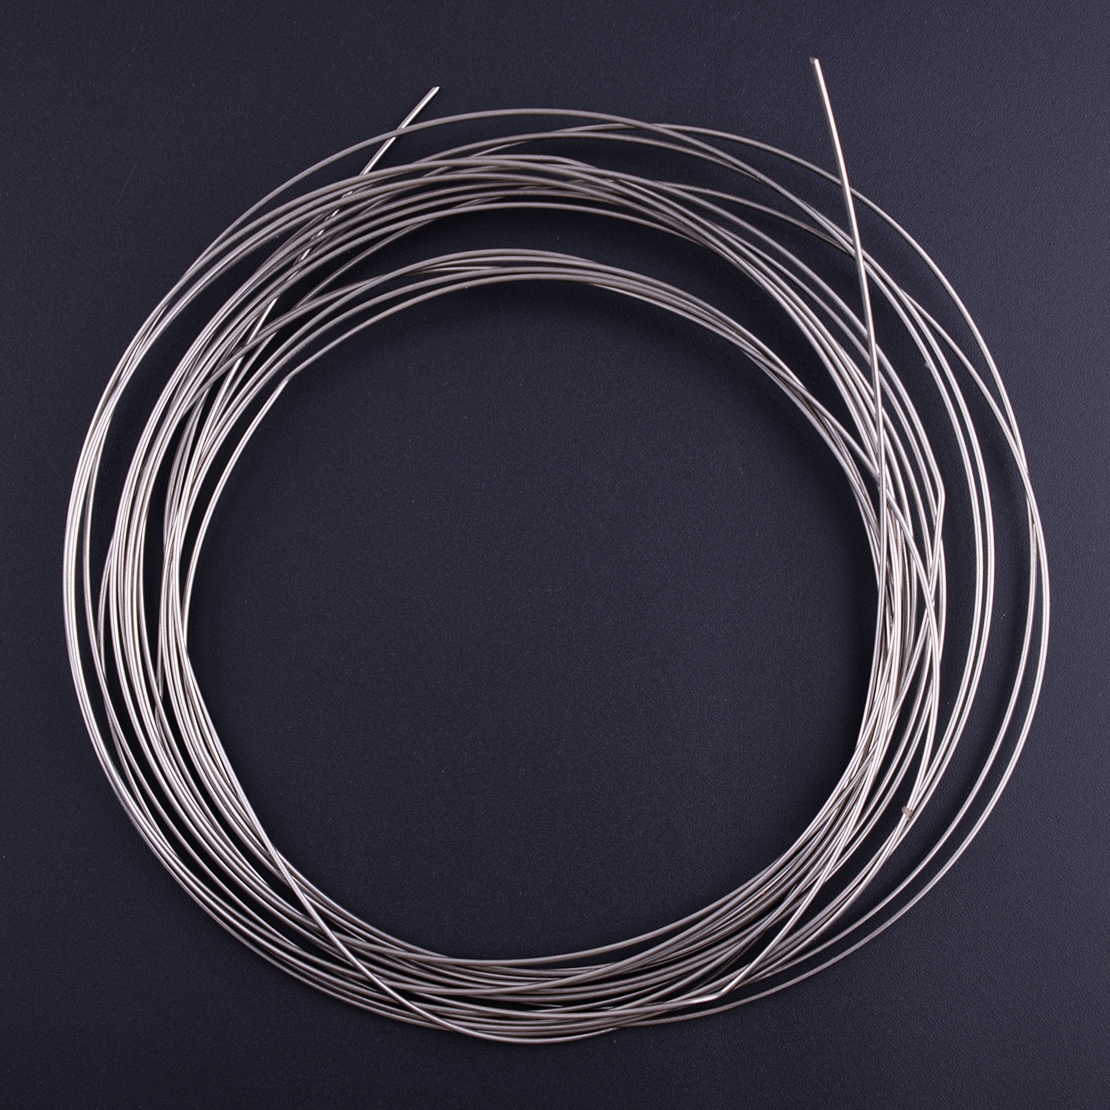 LETAOSK High quality 5M 1mm Silver 304 Stainless Steel Bright Single Hard Wire Hanging Fastening Craft Decorating